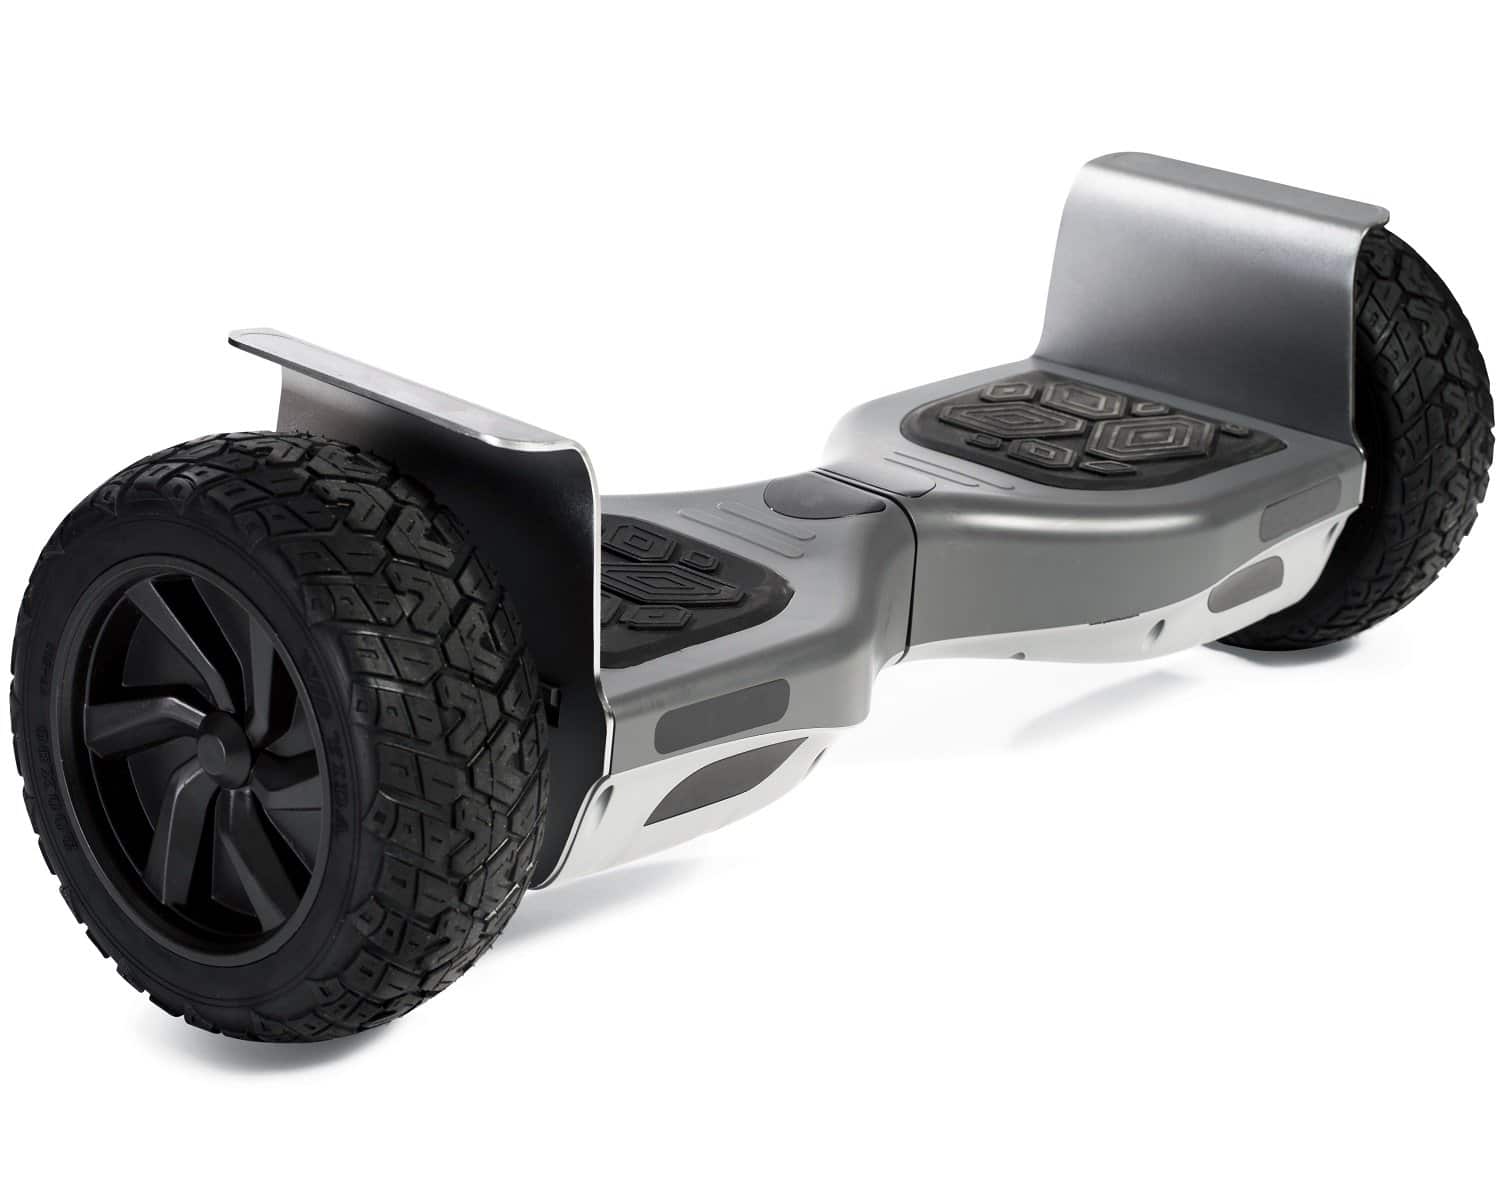 Comment choisir son hoverboard ? Guide d'achat pour hoverboard